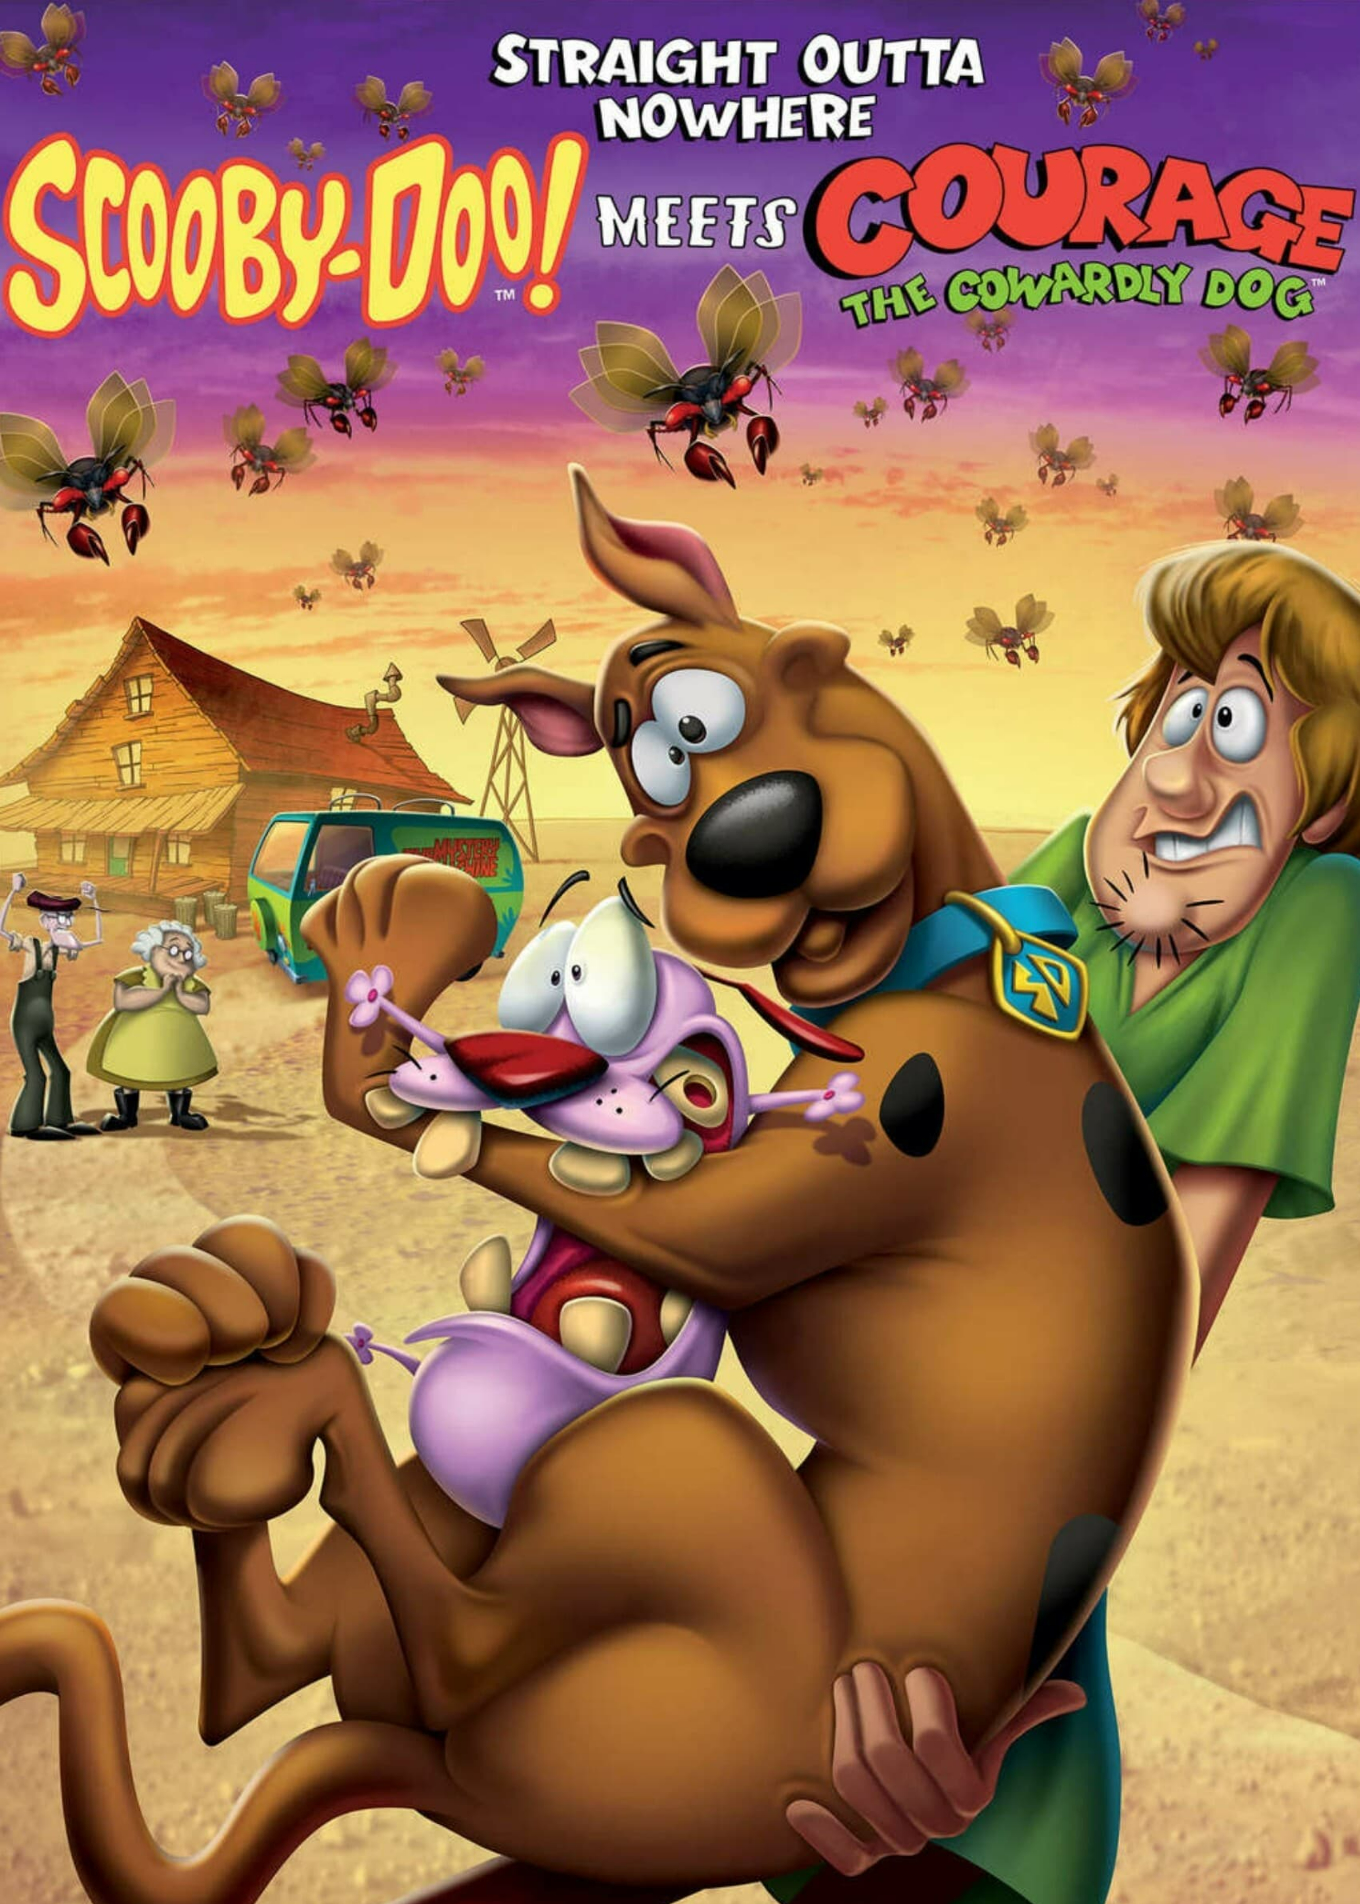 Straight Outta Nowhere: Scooby-Doo! Meets Courage the Cowardly Dog - Straight Outta Nowhere: Scooby-Doo! Meets Courage the Cowardly Dog